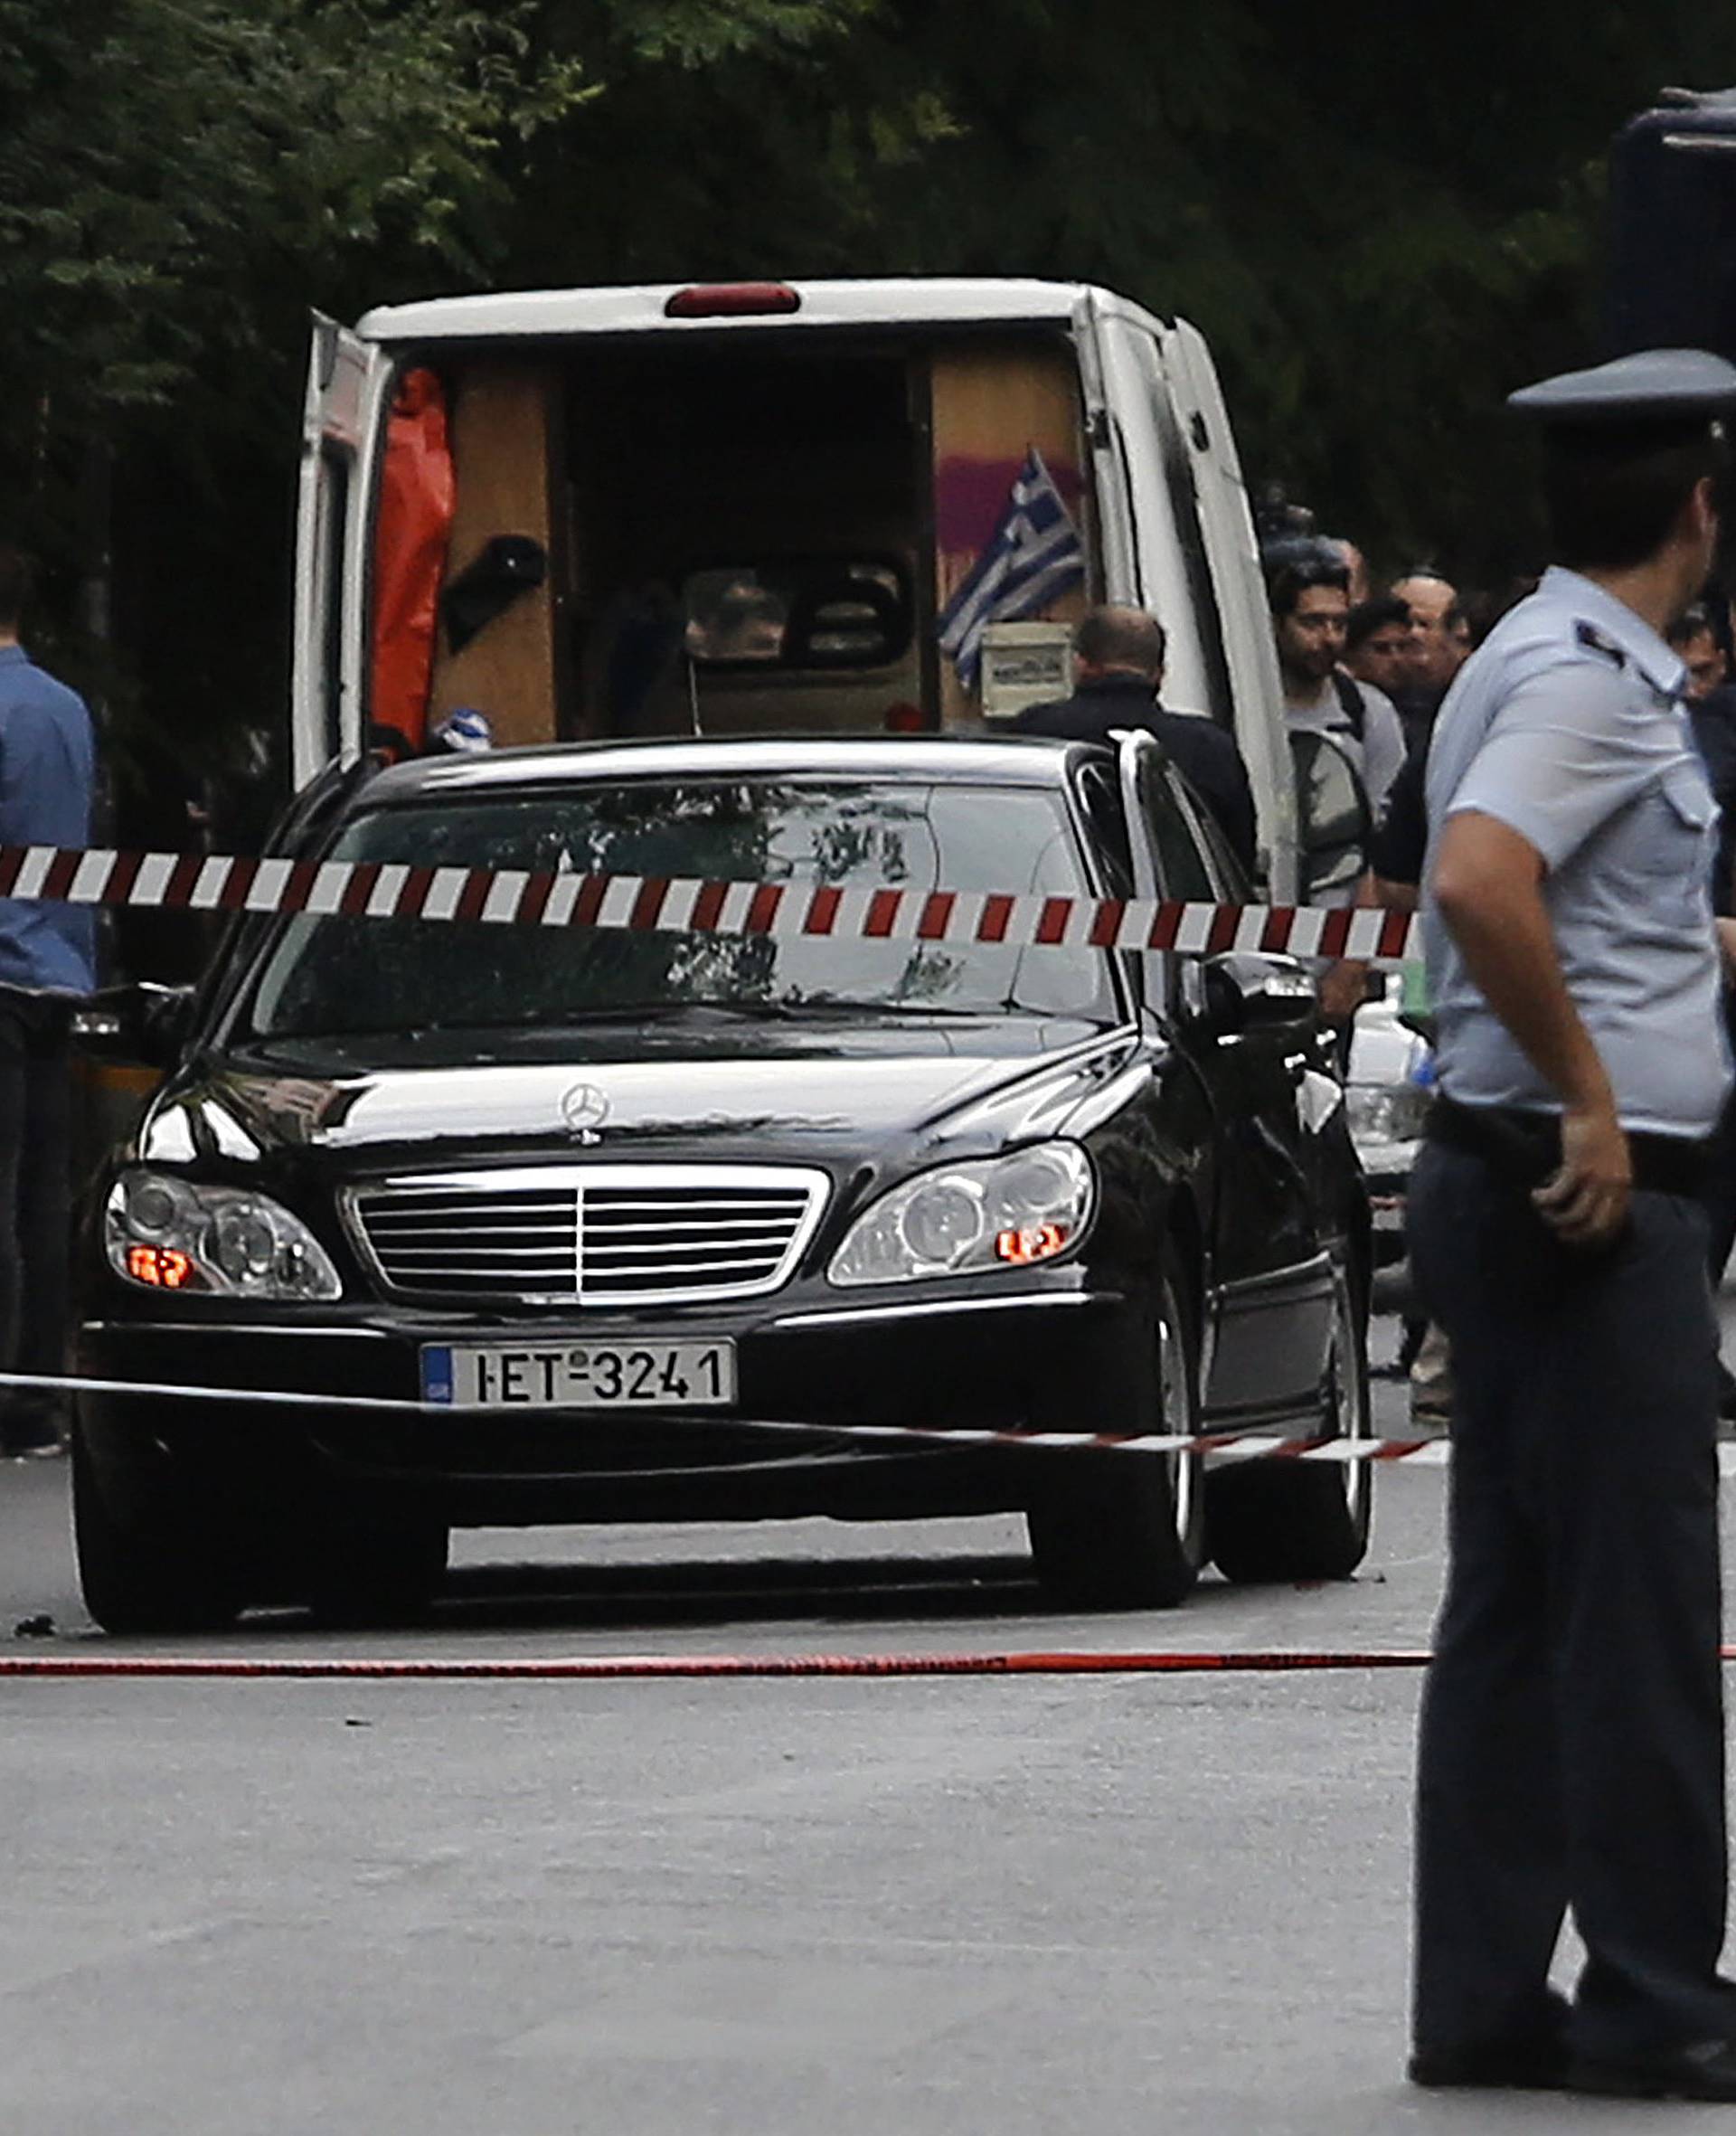 Police secure the area around the car of former Greek prime minister and former central bank chief Lucas Papademos following the detonation of an envelope injuring him and his driver, in Athens